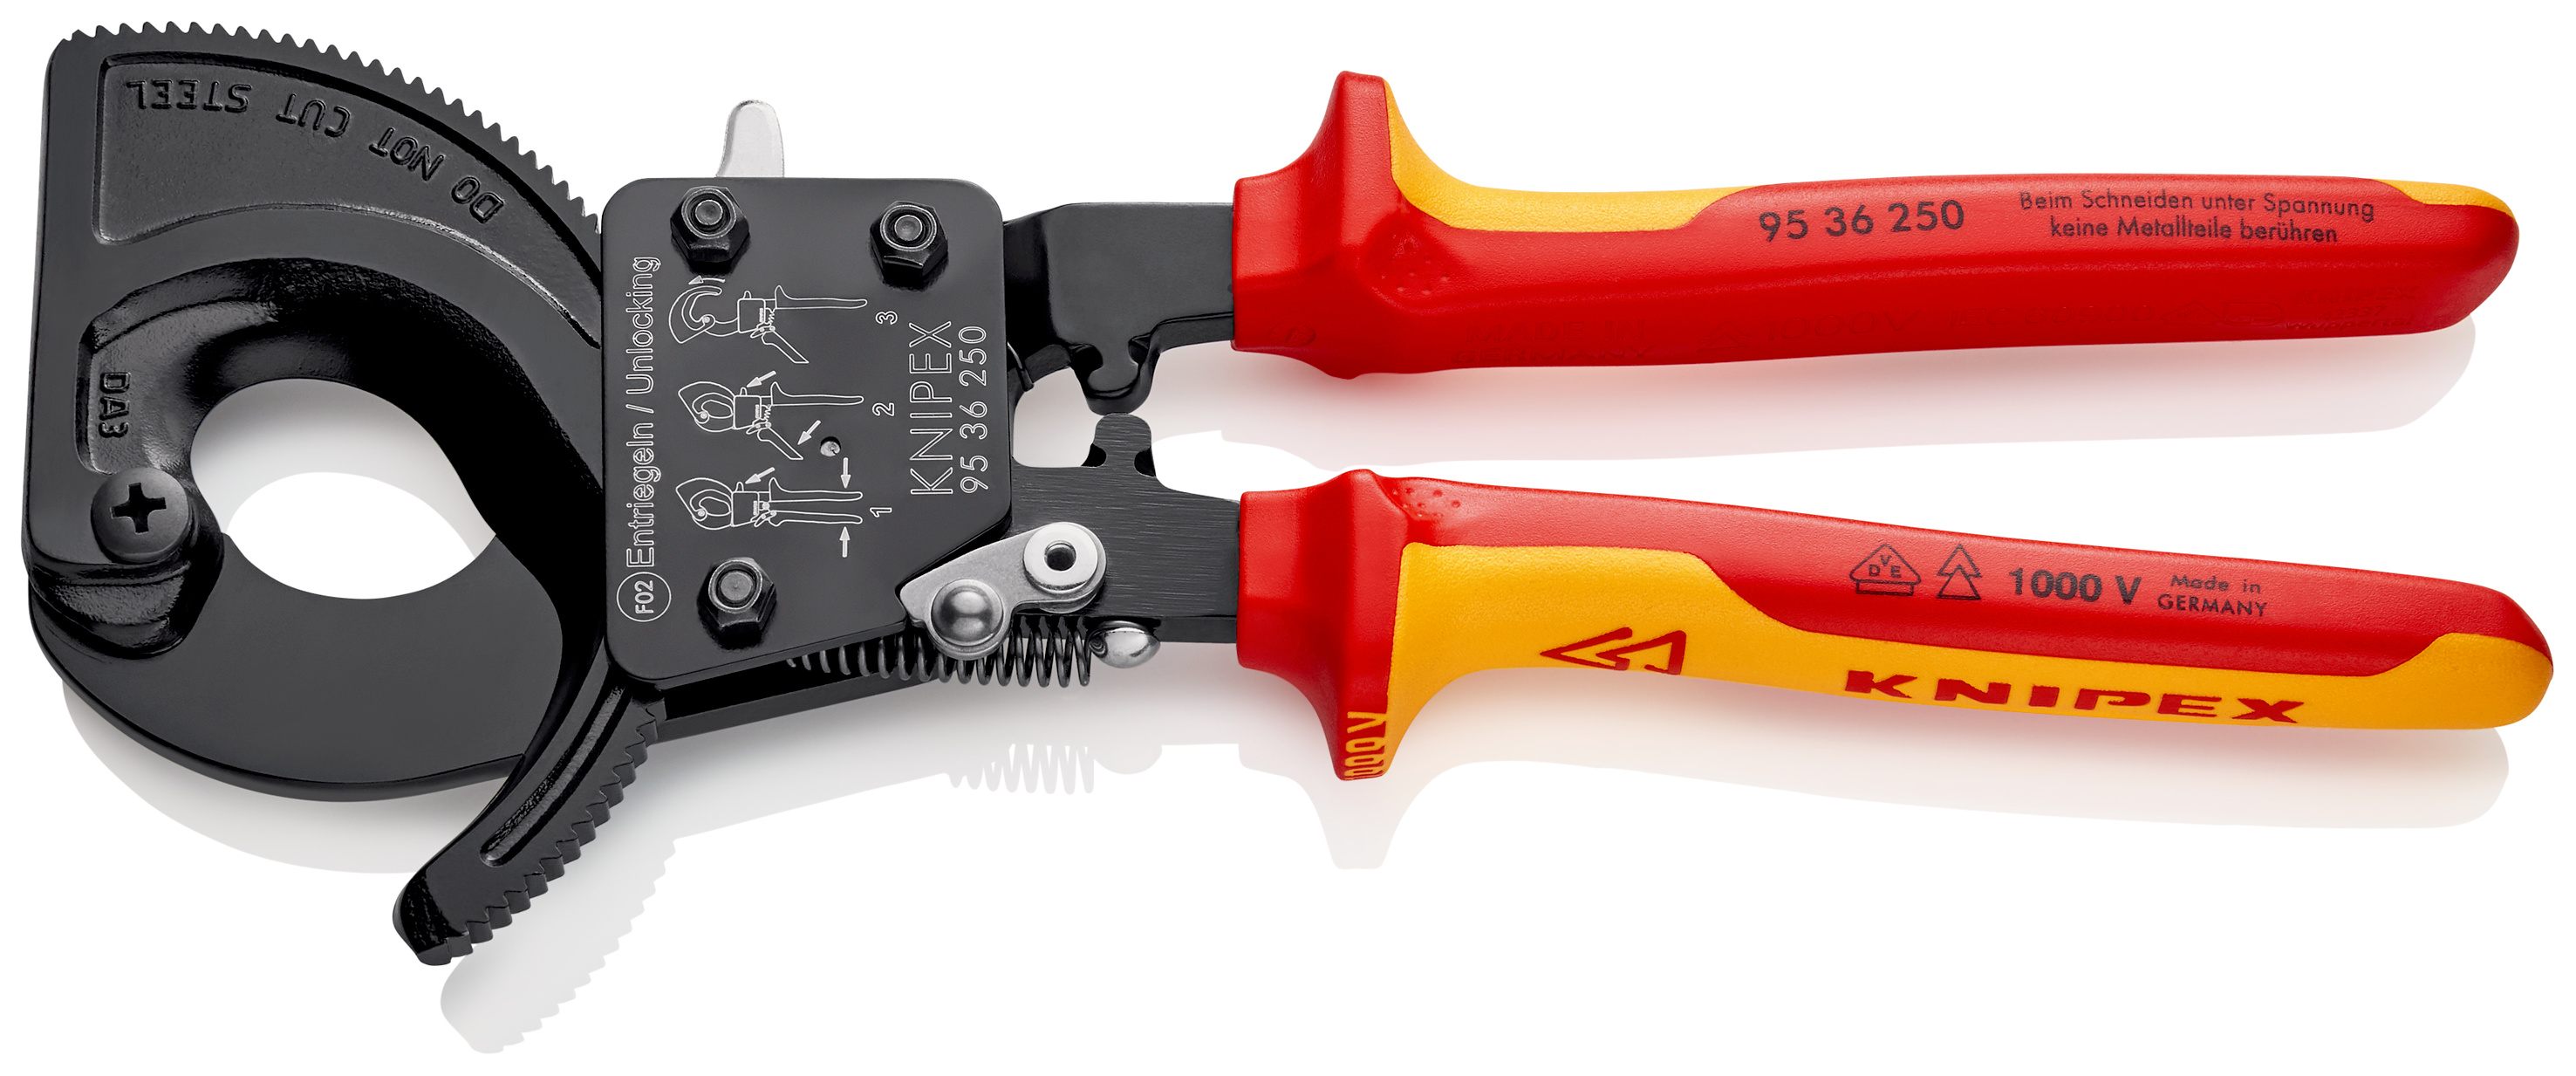 KNIPEX 9532-340SR用リペアキット ( 9539-340-01 ) KNIPEX社 :TR